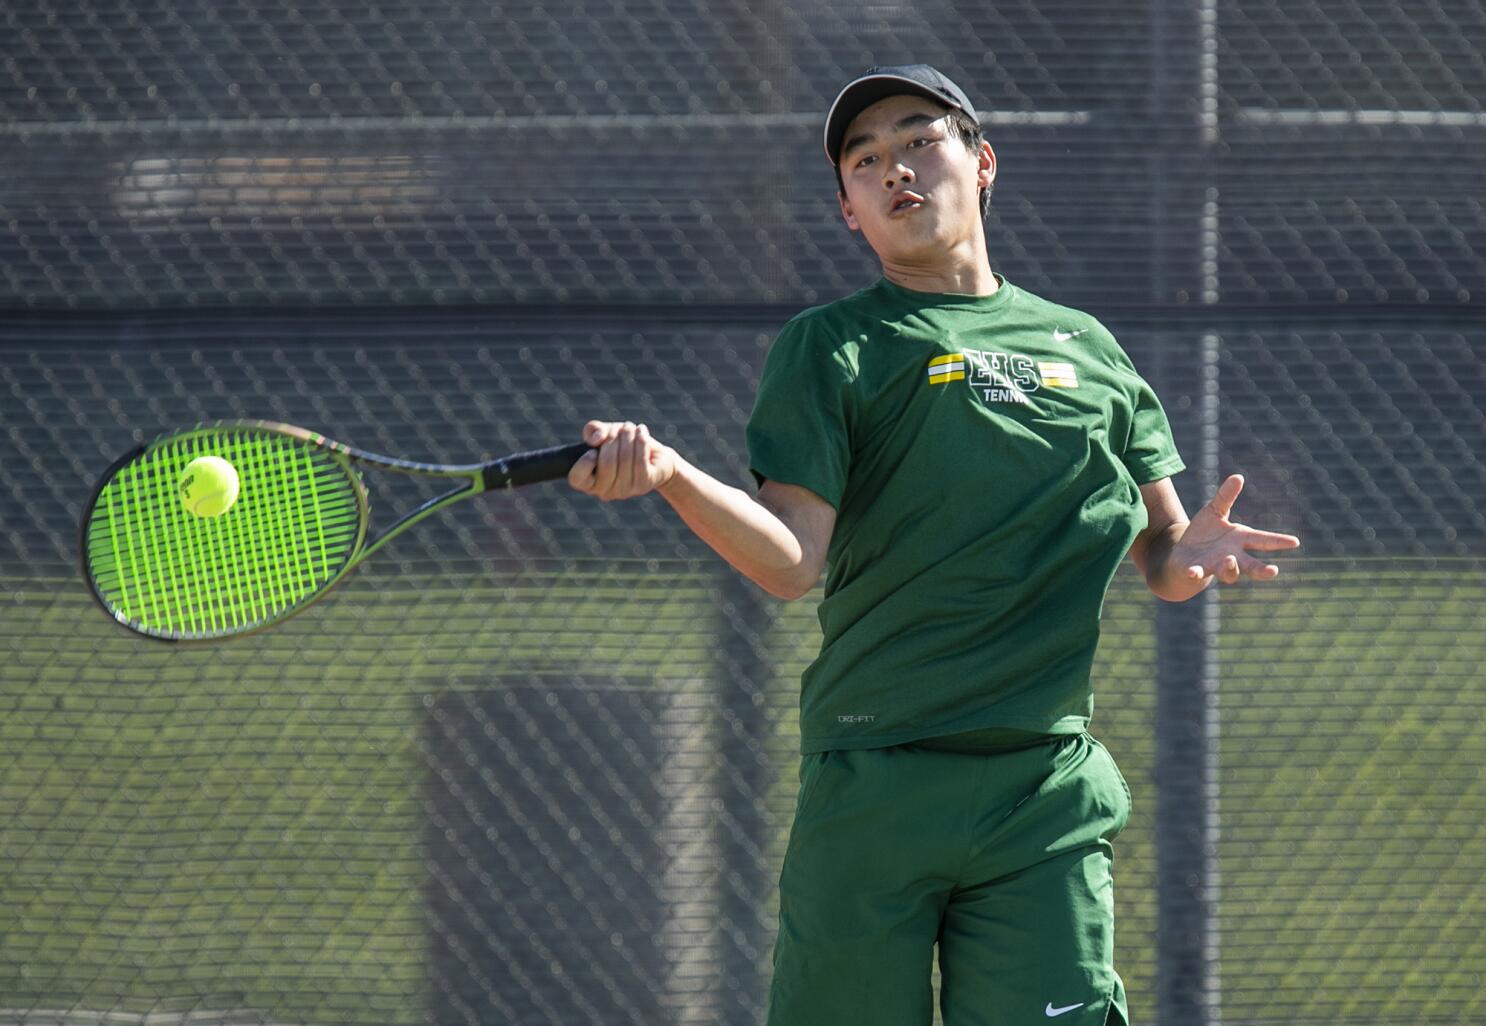 Though 2-2, Boys Tennis Team Is on the Move